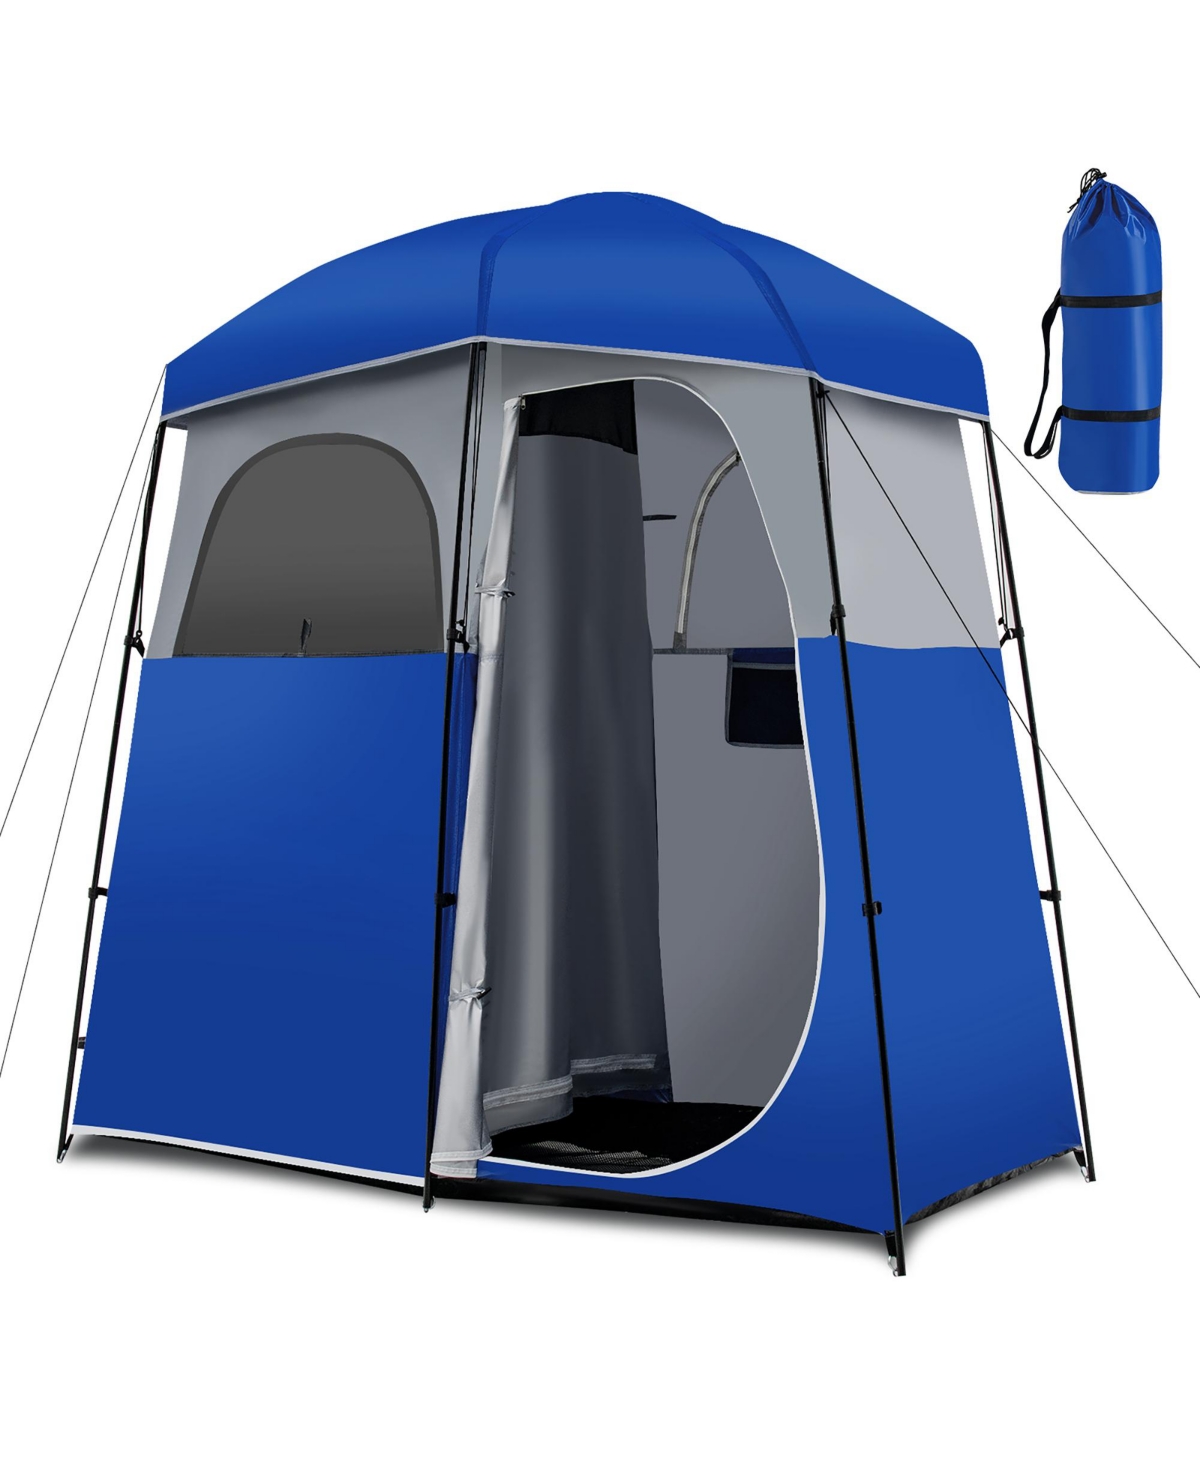 Double-Room Camping Shower Toilet Tent with Floor Oversize Portable Storage Bag - Blue